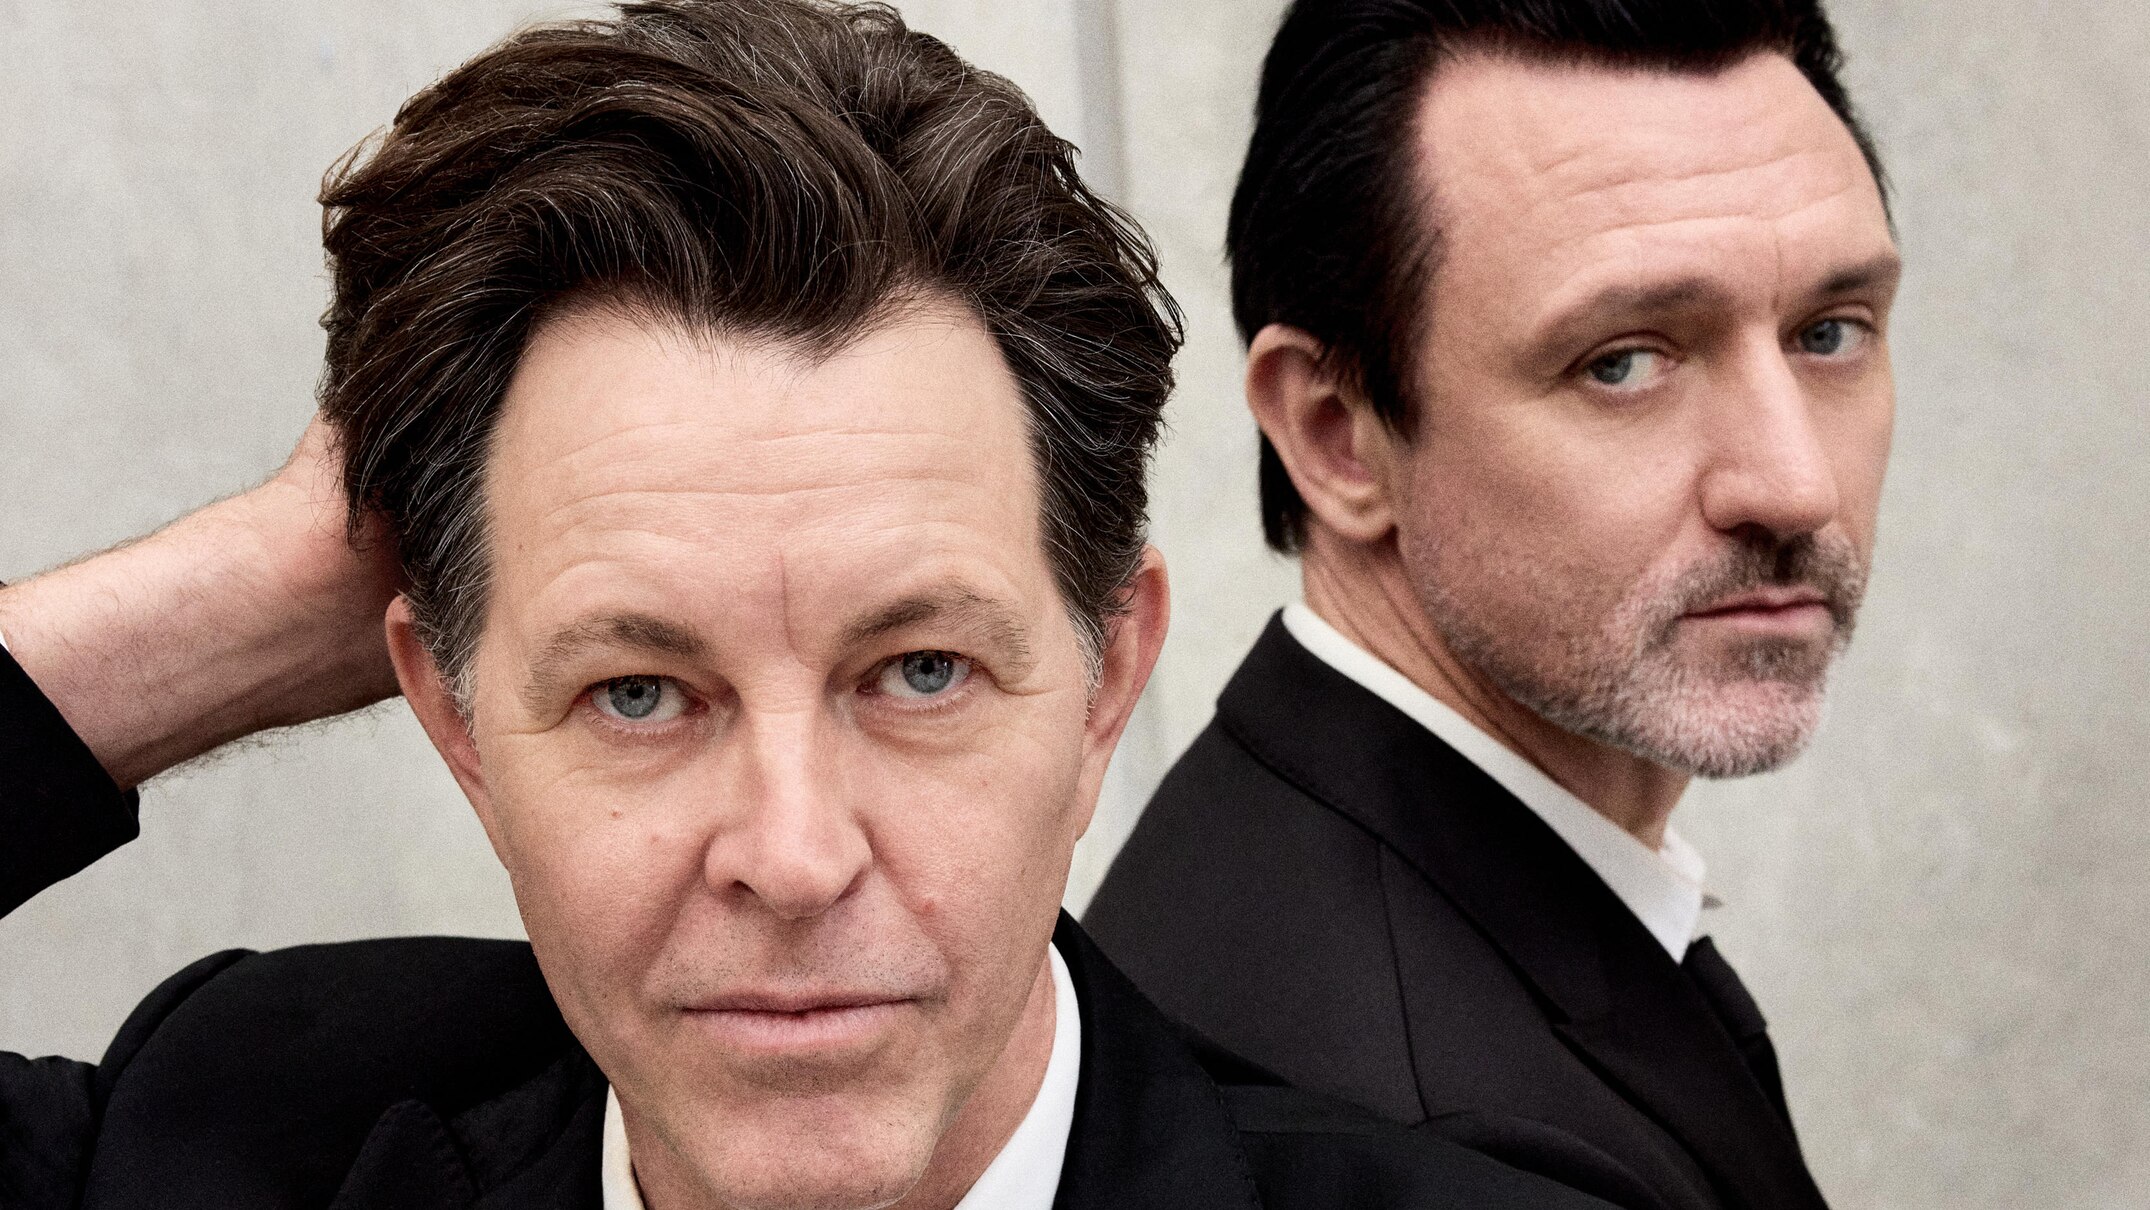 bernard fanning and paul dempsey release disconnect, first single of collab project fanning dempsey national park